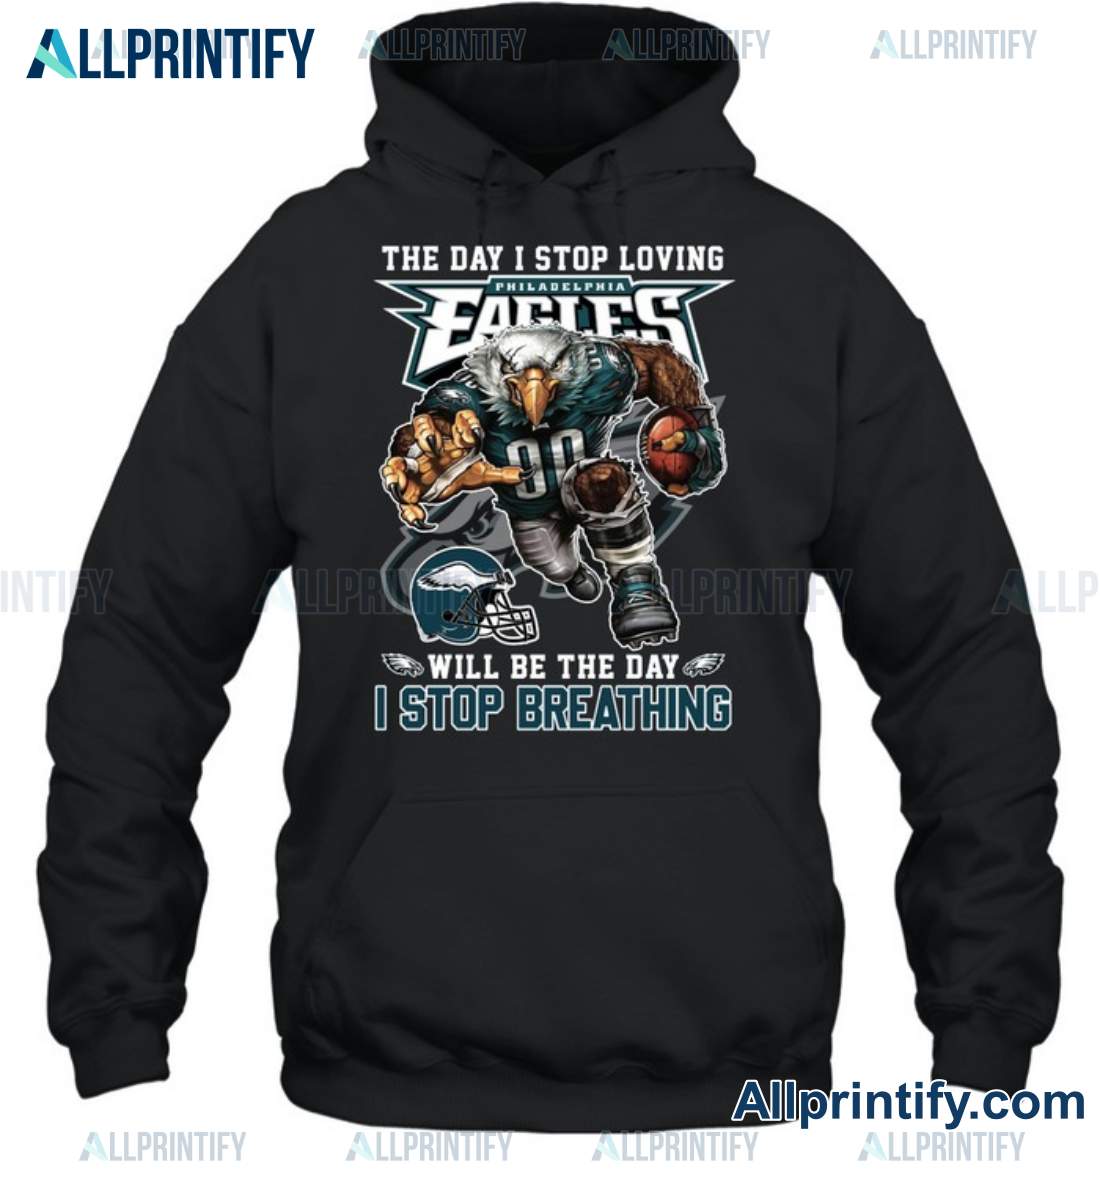 The Day I Stop Loving Philadelphia Eagles Will Be The Day I Stop Breathing Shirt b